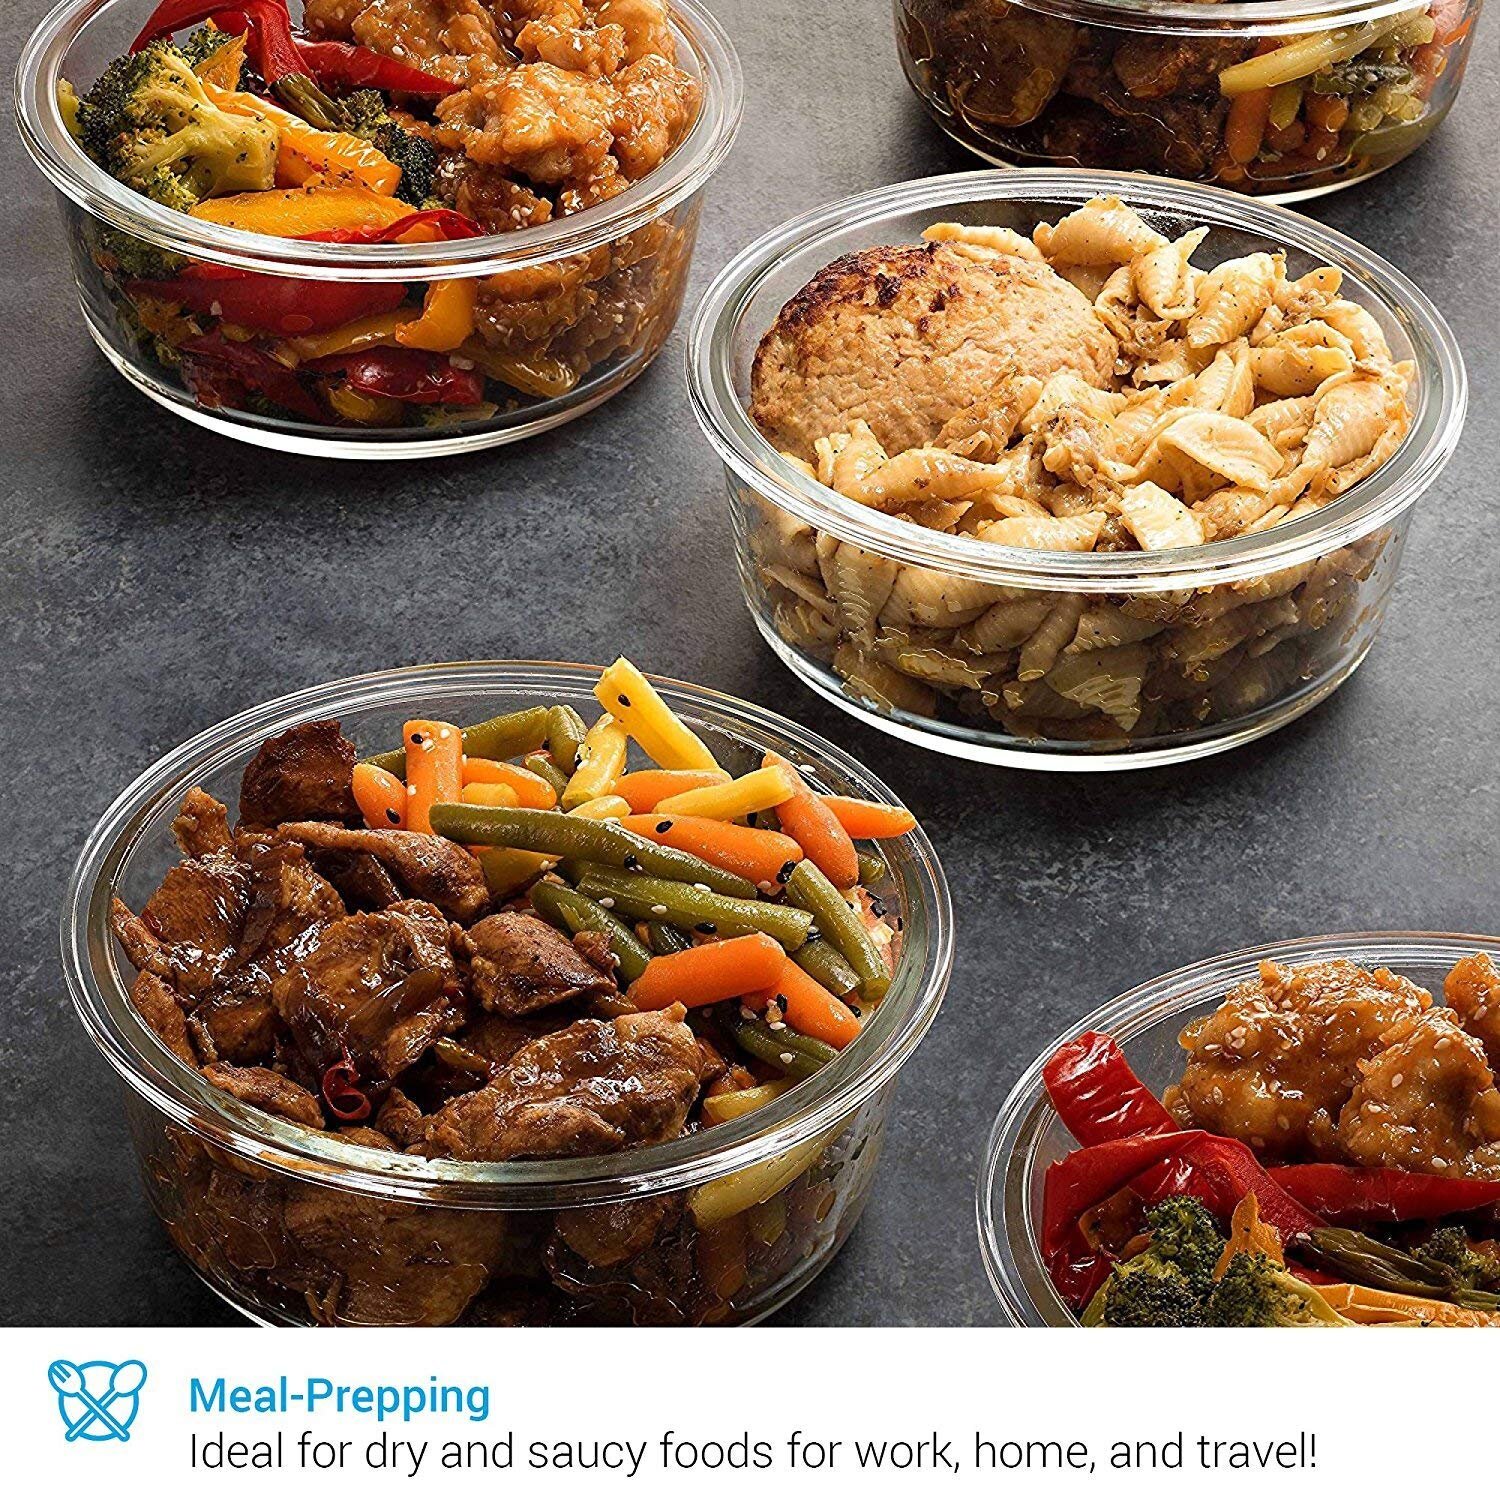 Rebrilliant Lana Glass Food Storage Container - Set of 6 & Reviews